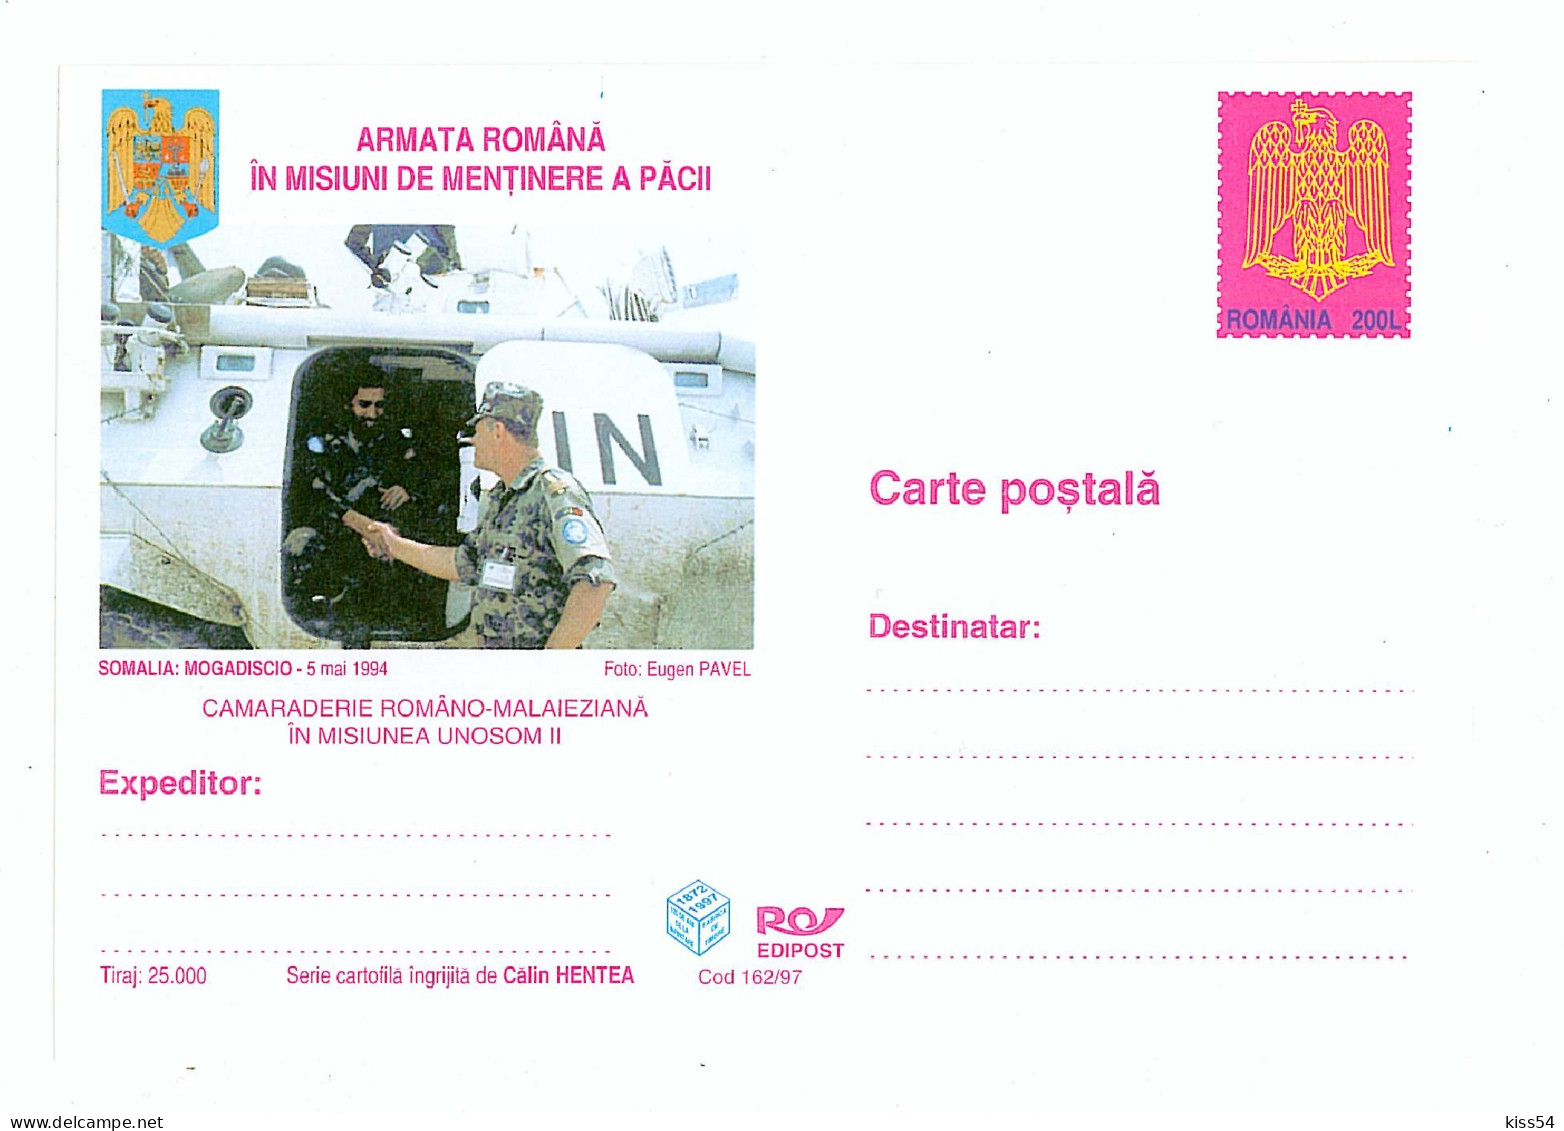 IP 97 - 162 NATO, Romanian Army In Peacekeeping Missions - Stationery - Unused - 1997 - Postal Stationery